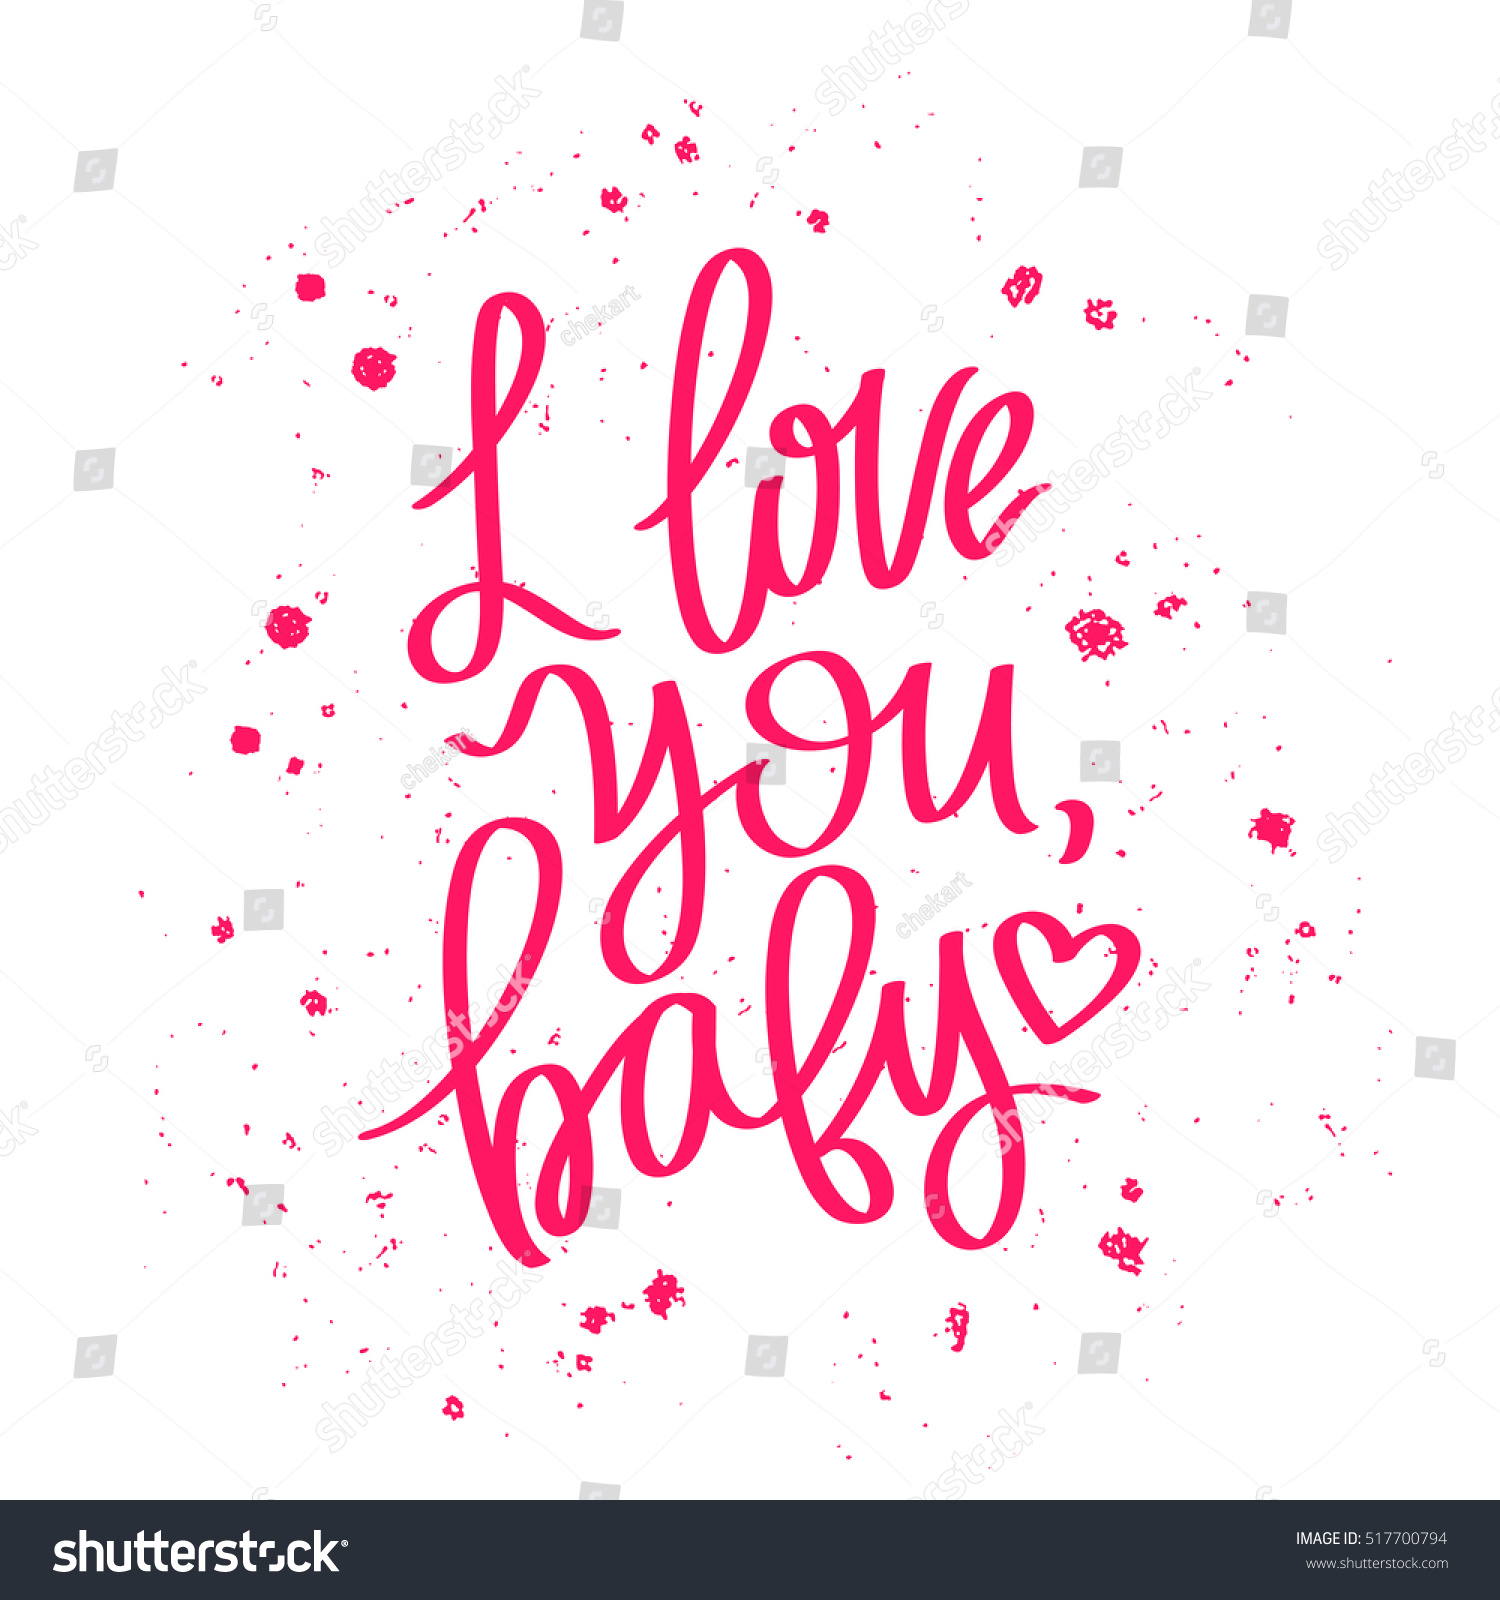 Love You Baby Trend Calligraphy Vector Stock Vector Royalty Free